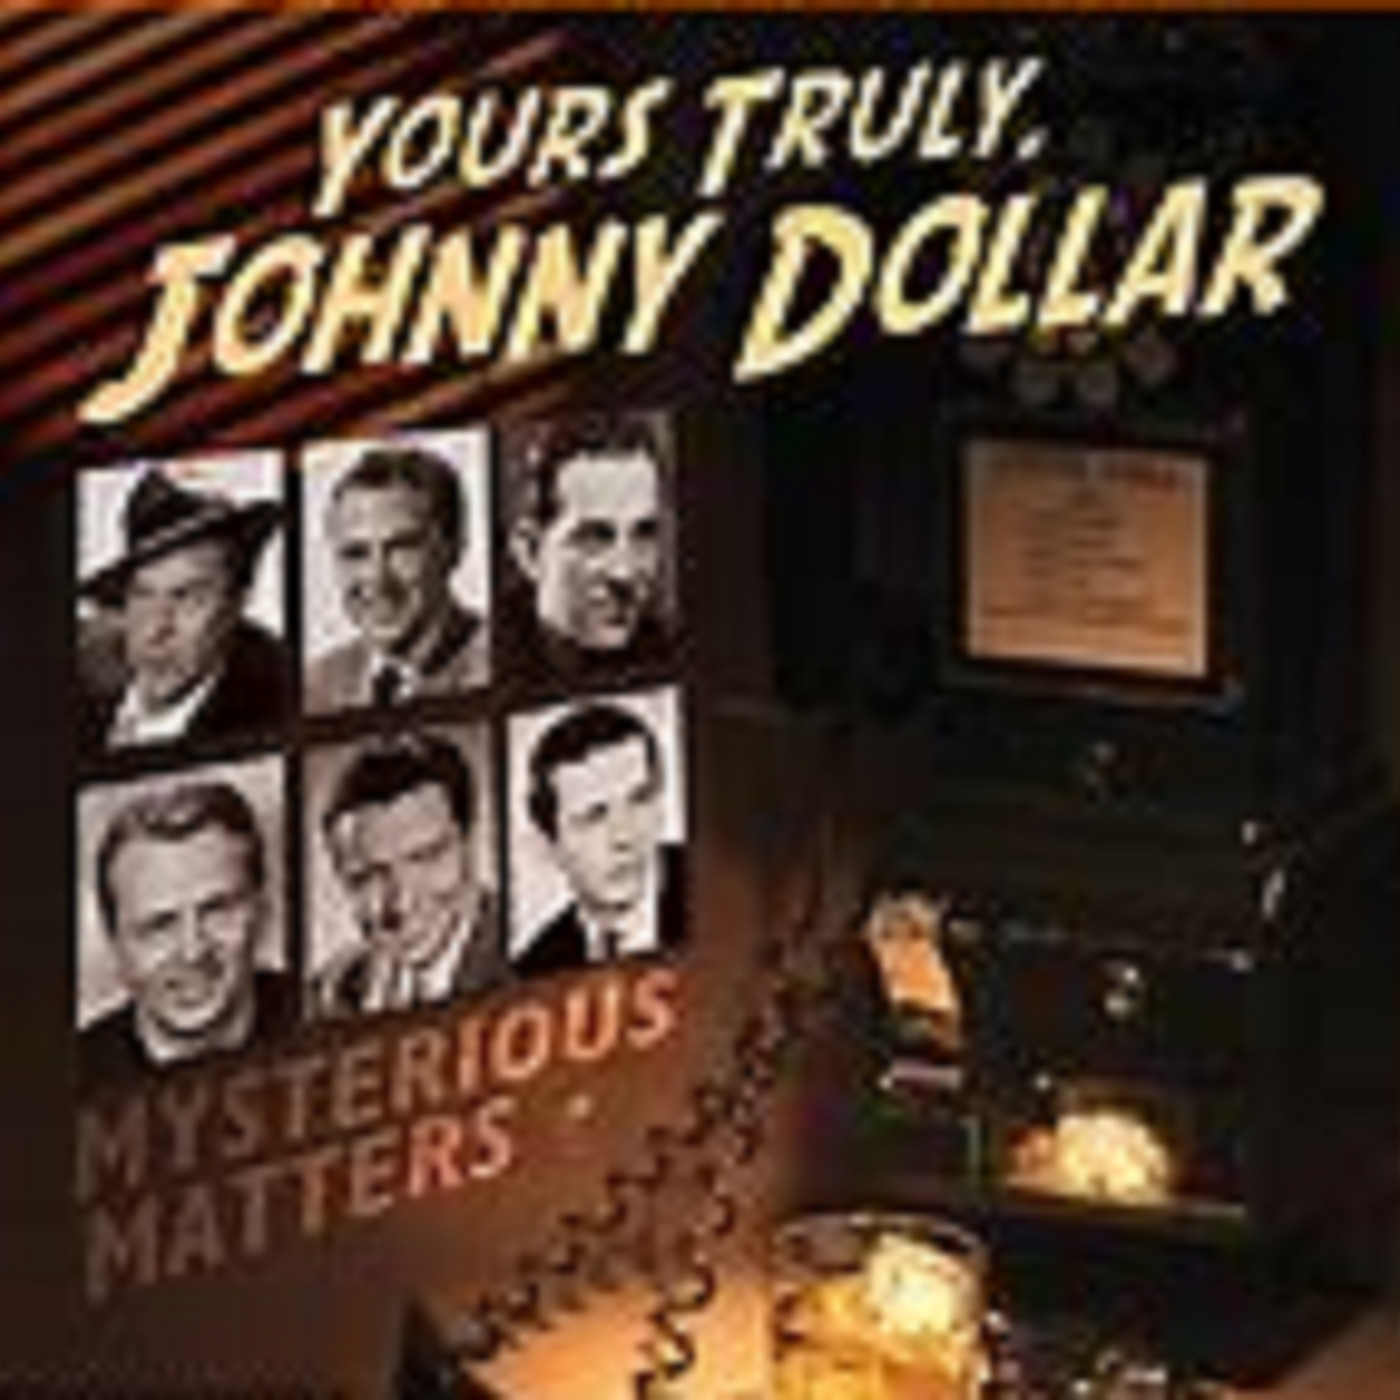 Yours Truly, Johnny Dollar - 100459, episode 659 - The Buffalo Matter Part 1